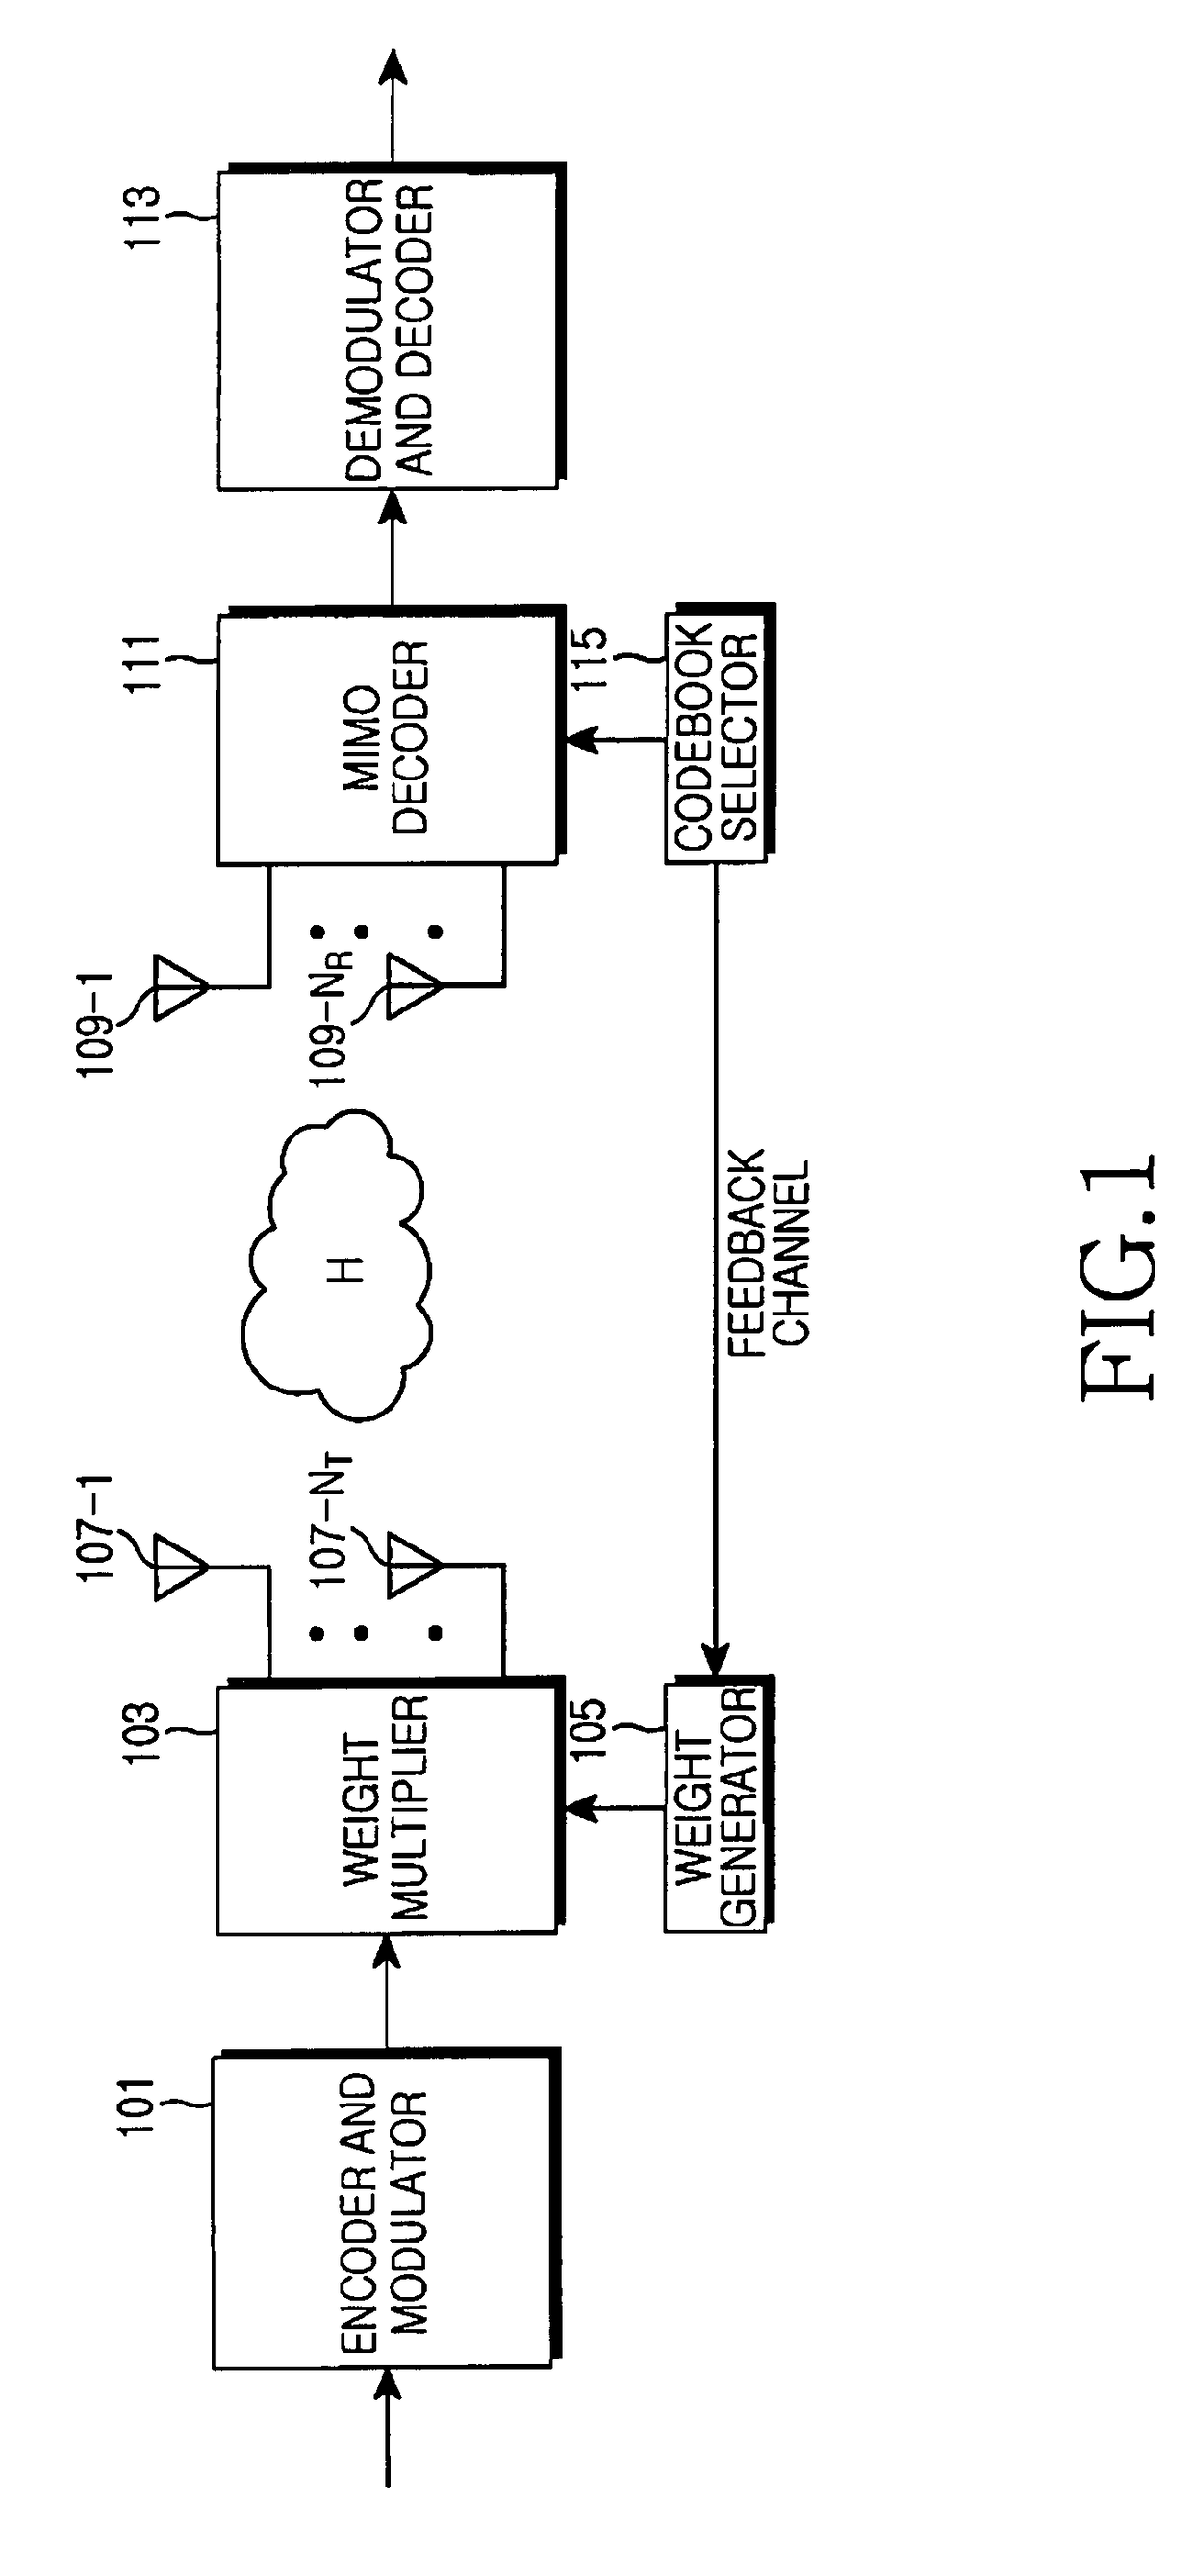 Apparatus and method for determining beamforming vector in a codebook-based beamforming system